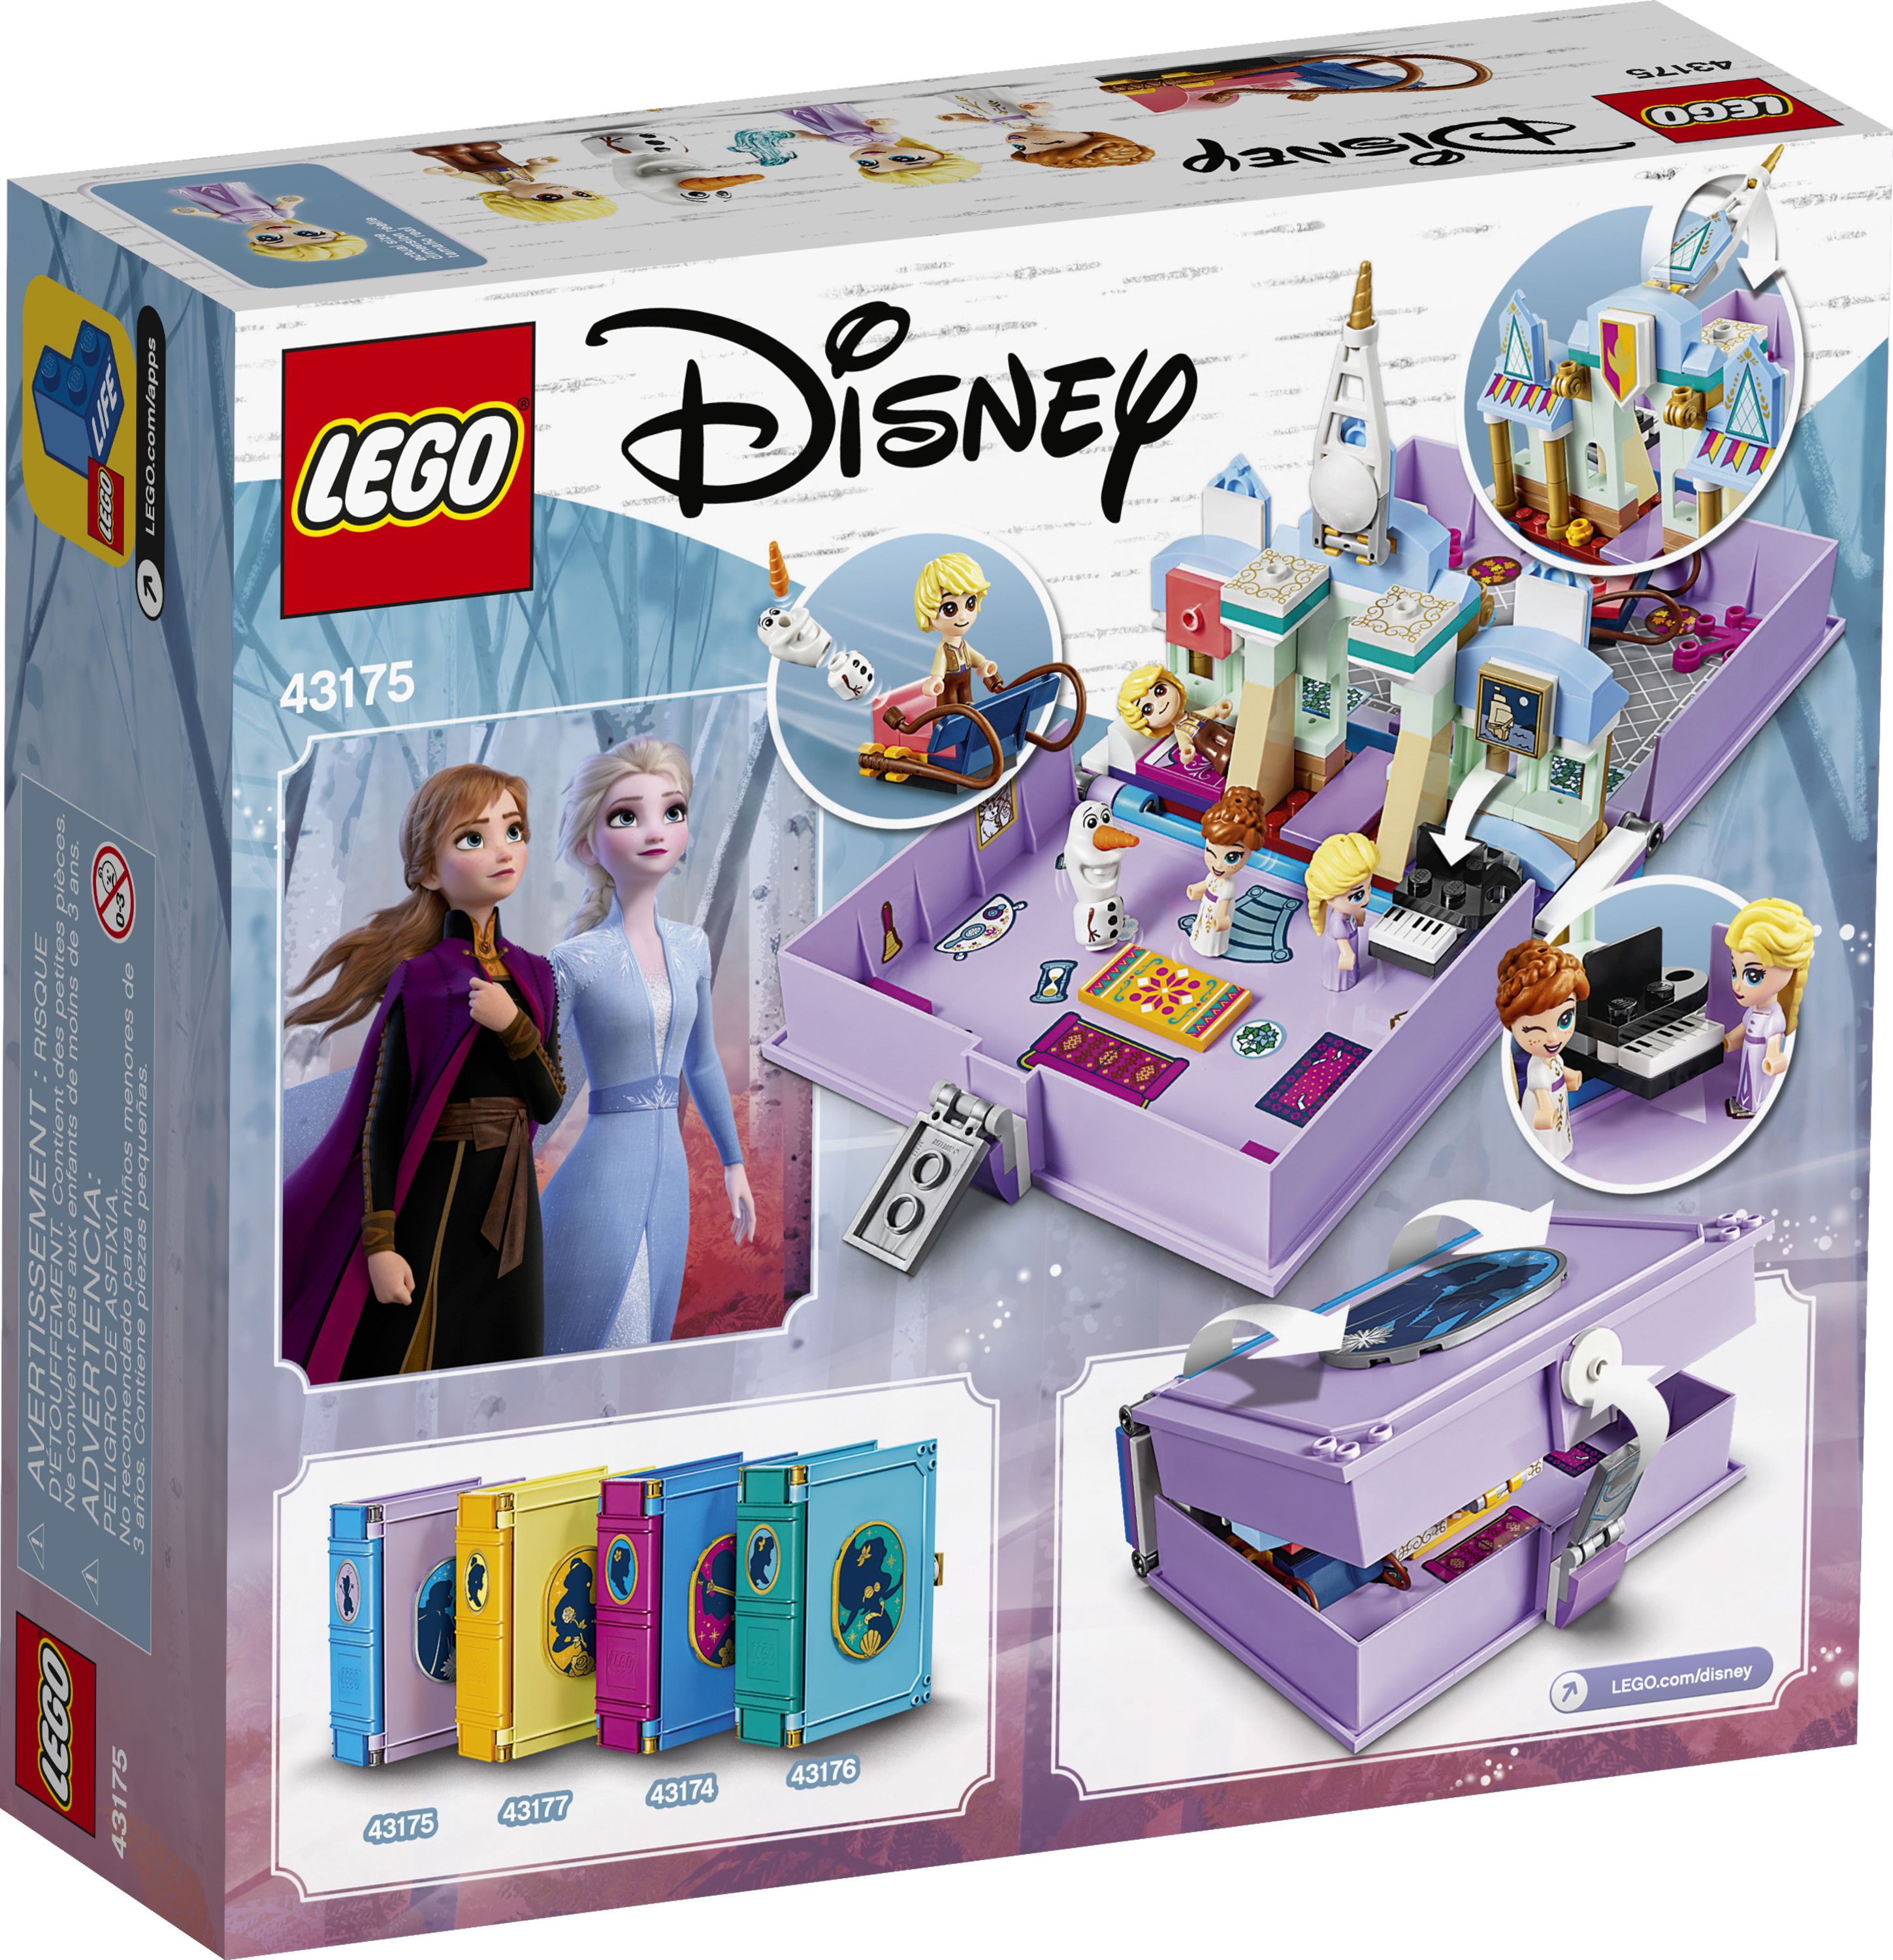 LEGO Disney Anna and Elsa’s Storybook Adventures 43175 Creative Building Kit (133 Pieces) - image 5 of 7